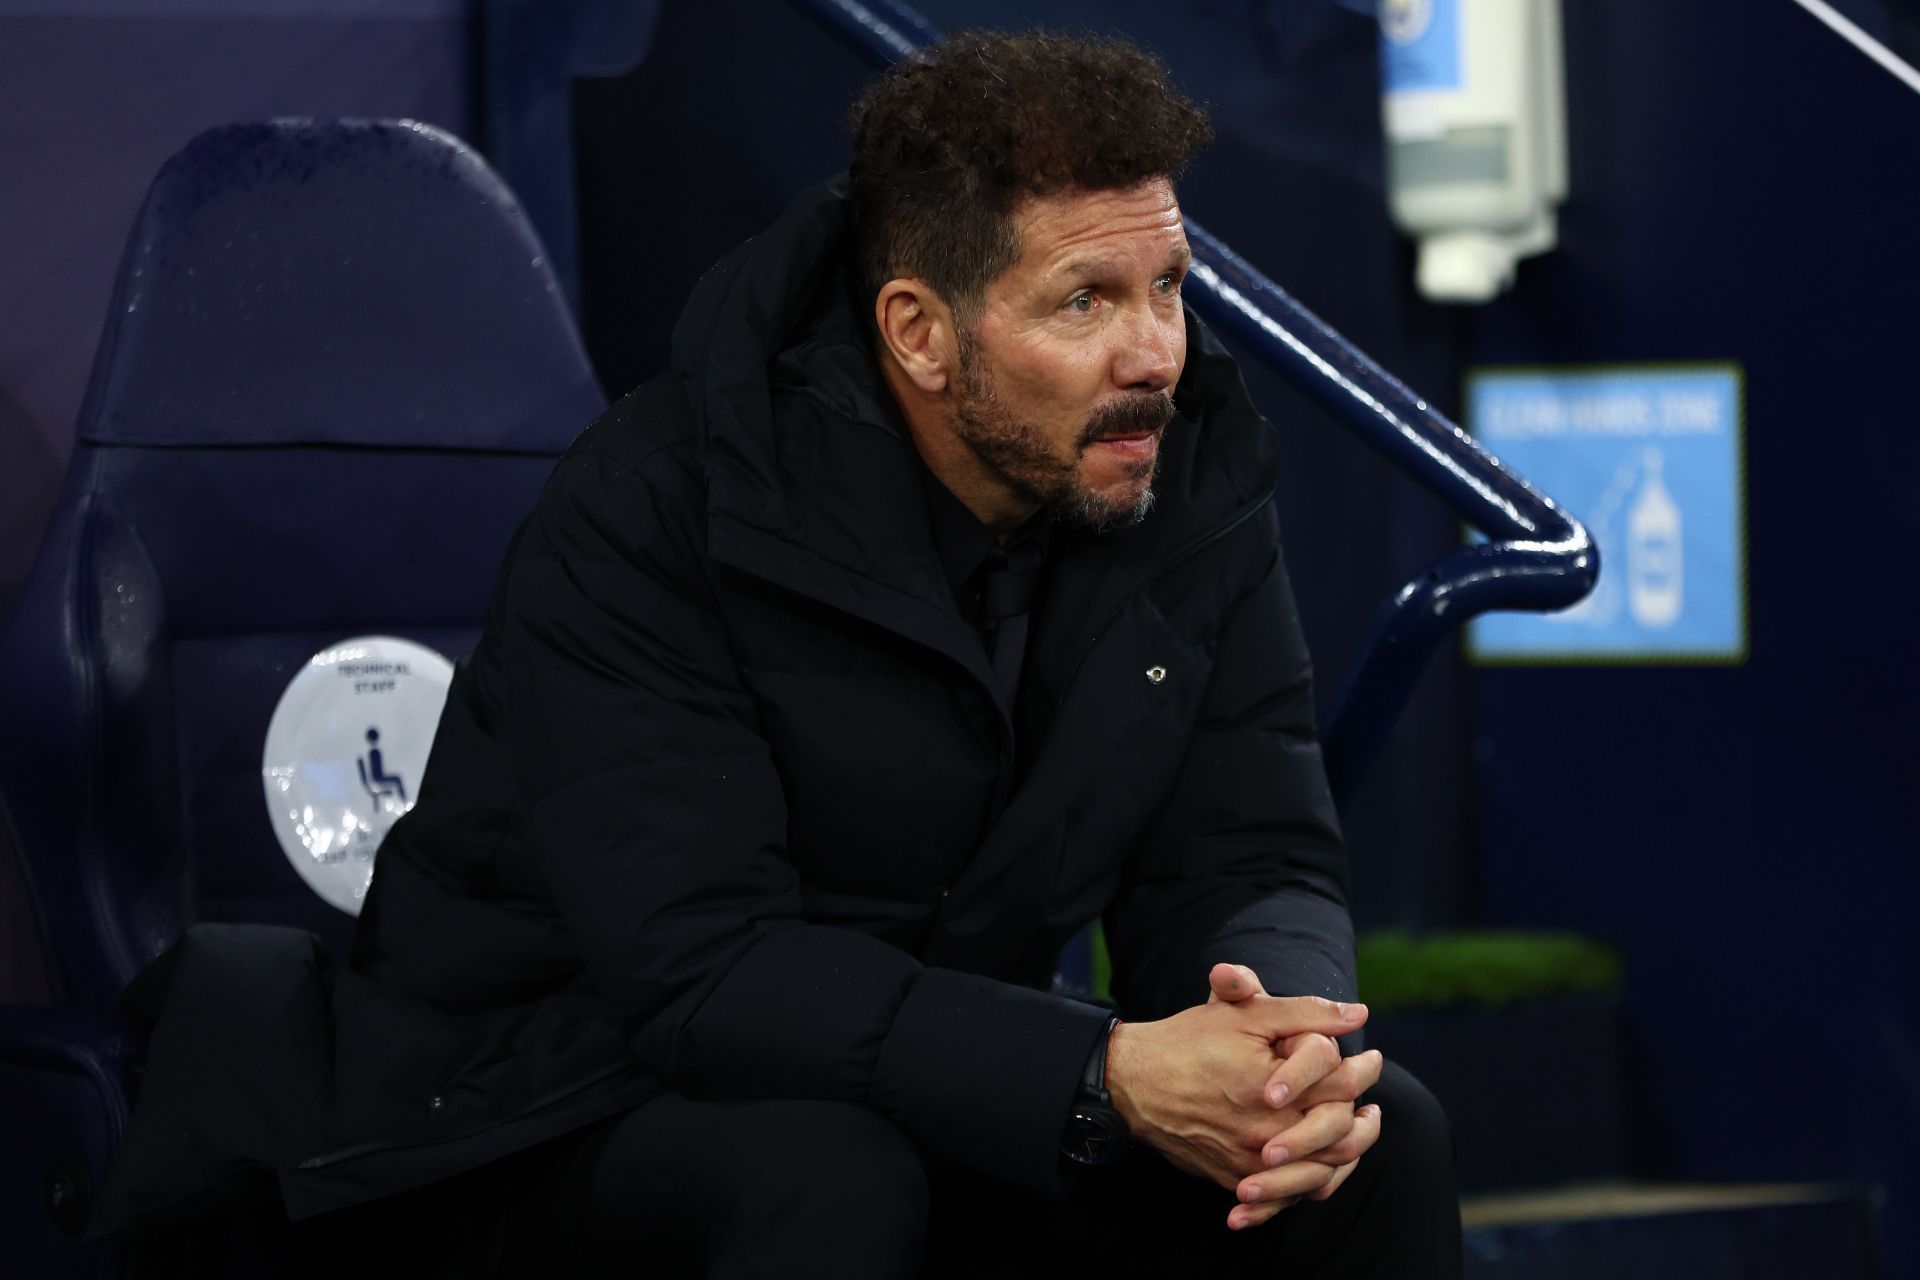 Diego Simeone would rock it up at Stamford Bridge, says Jason Cundy.